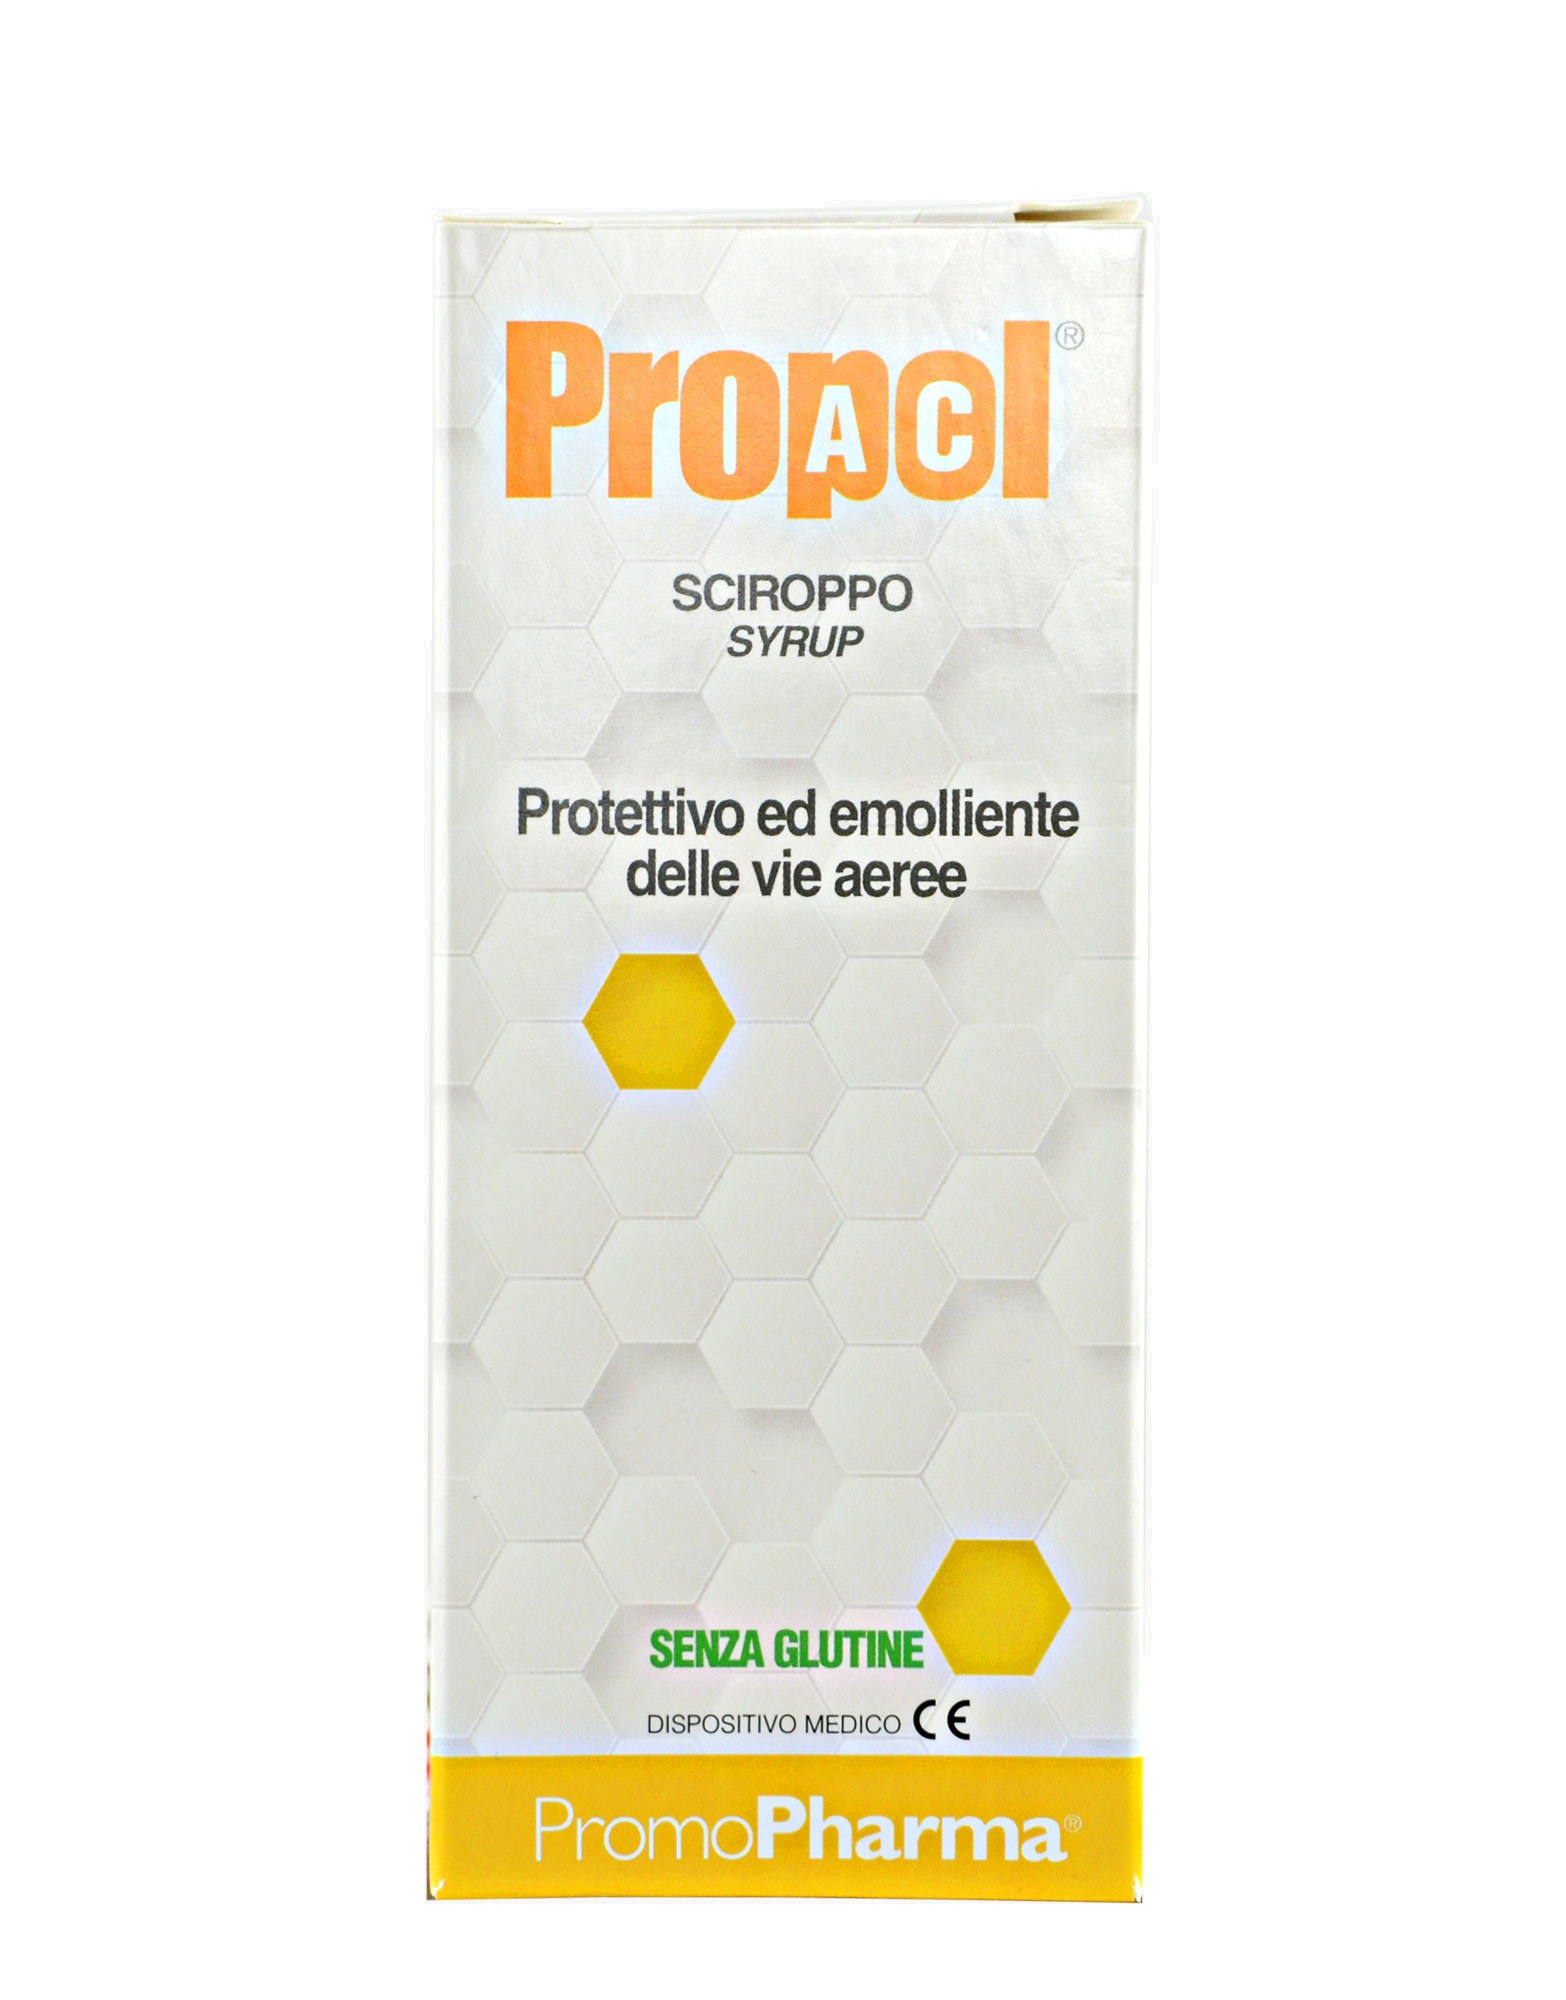 Than bus There is a need to Propol AC - Syrup by Promopharma, 100ml - iafstore.com